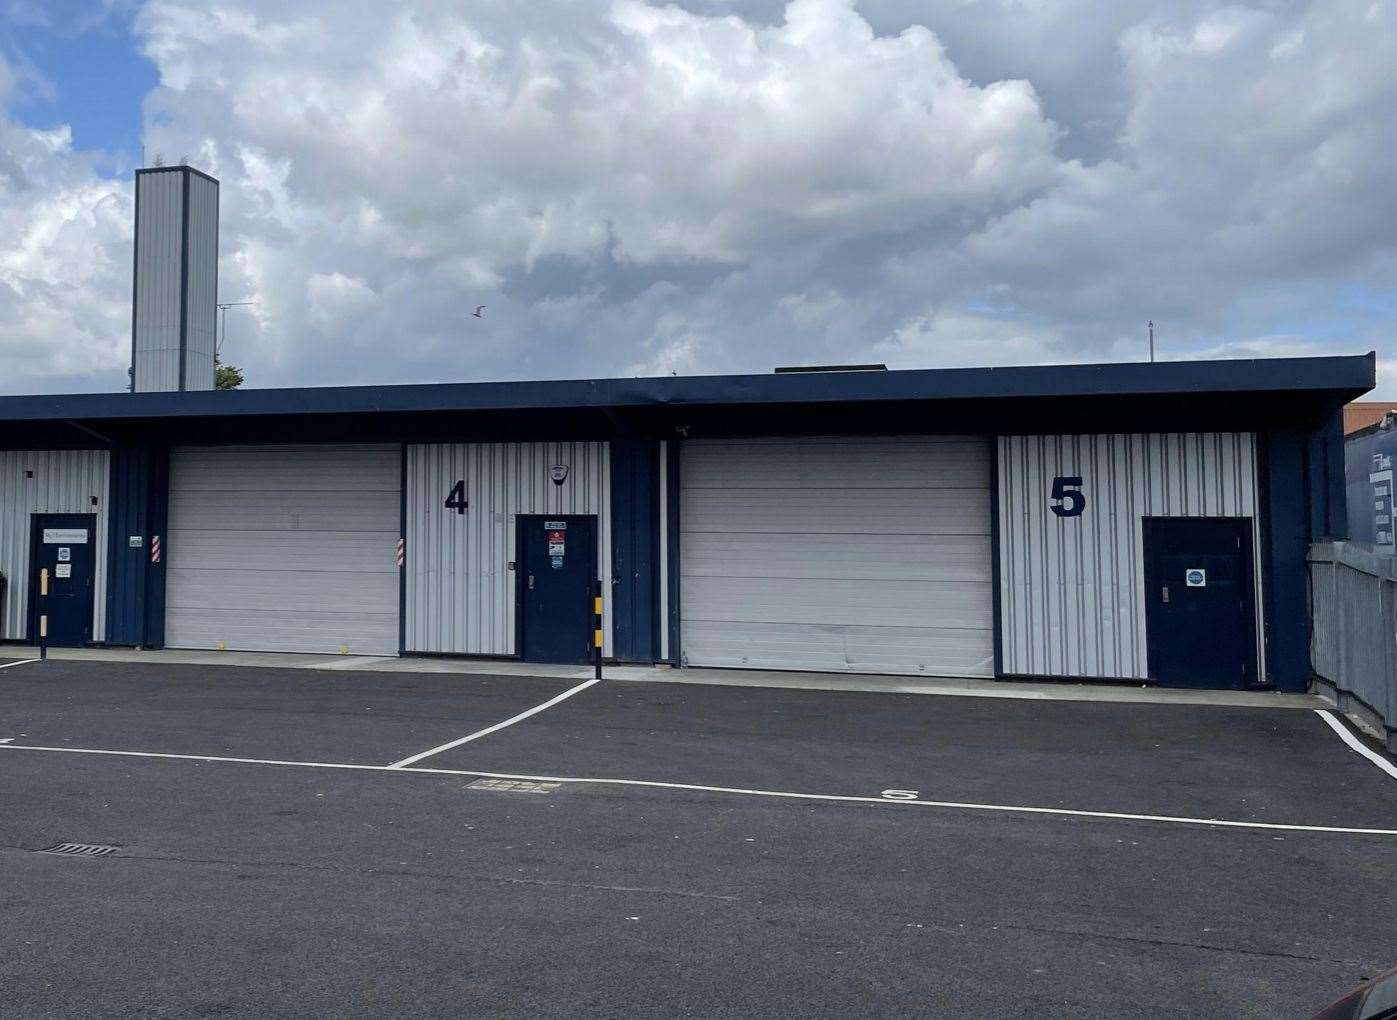 The micro-distillery is set to be established at the Southdown Enterprise Park in Brunswick Road, Ashford